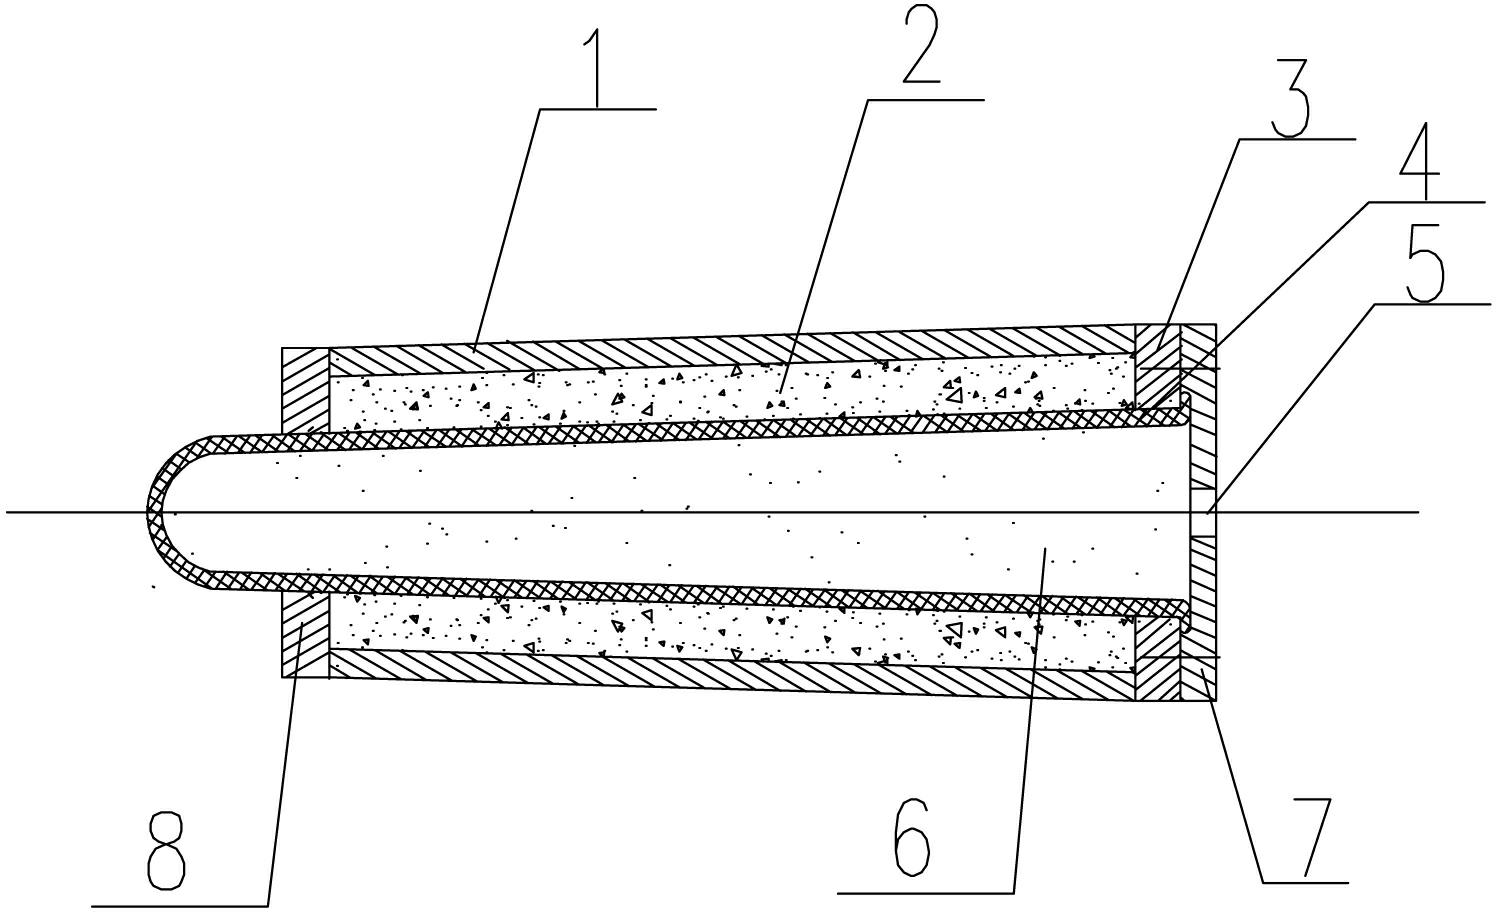 Thin-walled centrifugal concrete pole manufacture method